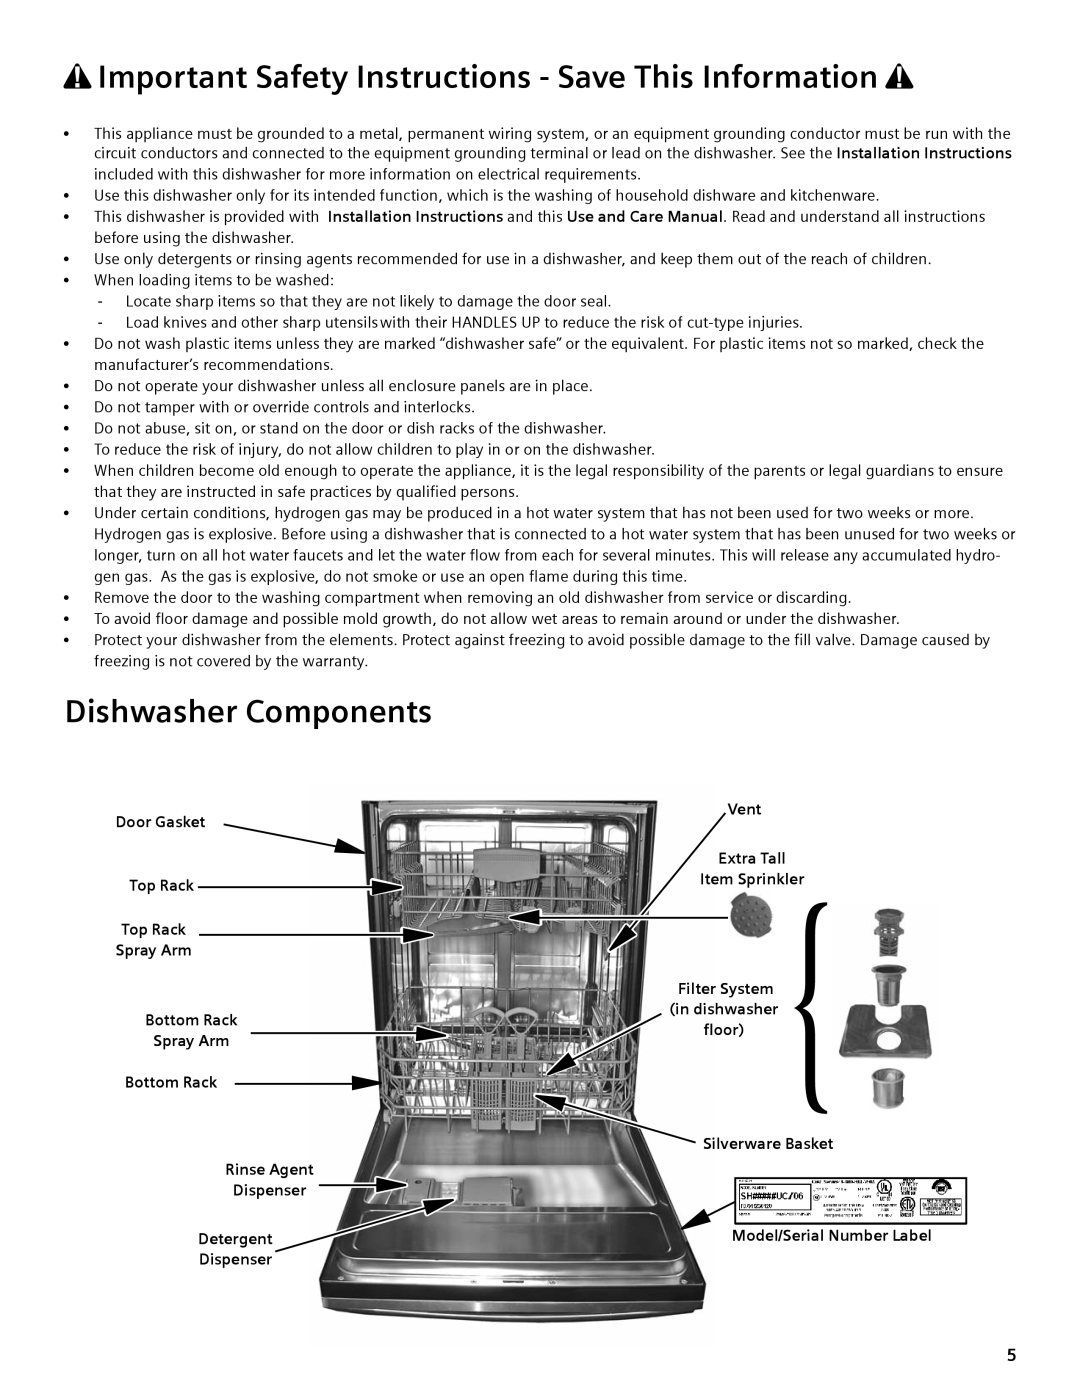 Bosch Appliances SHX99A, SHE98M, SHE99C, SHX98M Dishwasher Components, Important Safety Instructions - Save This Information 